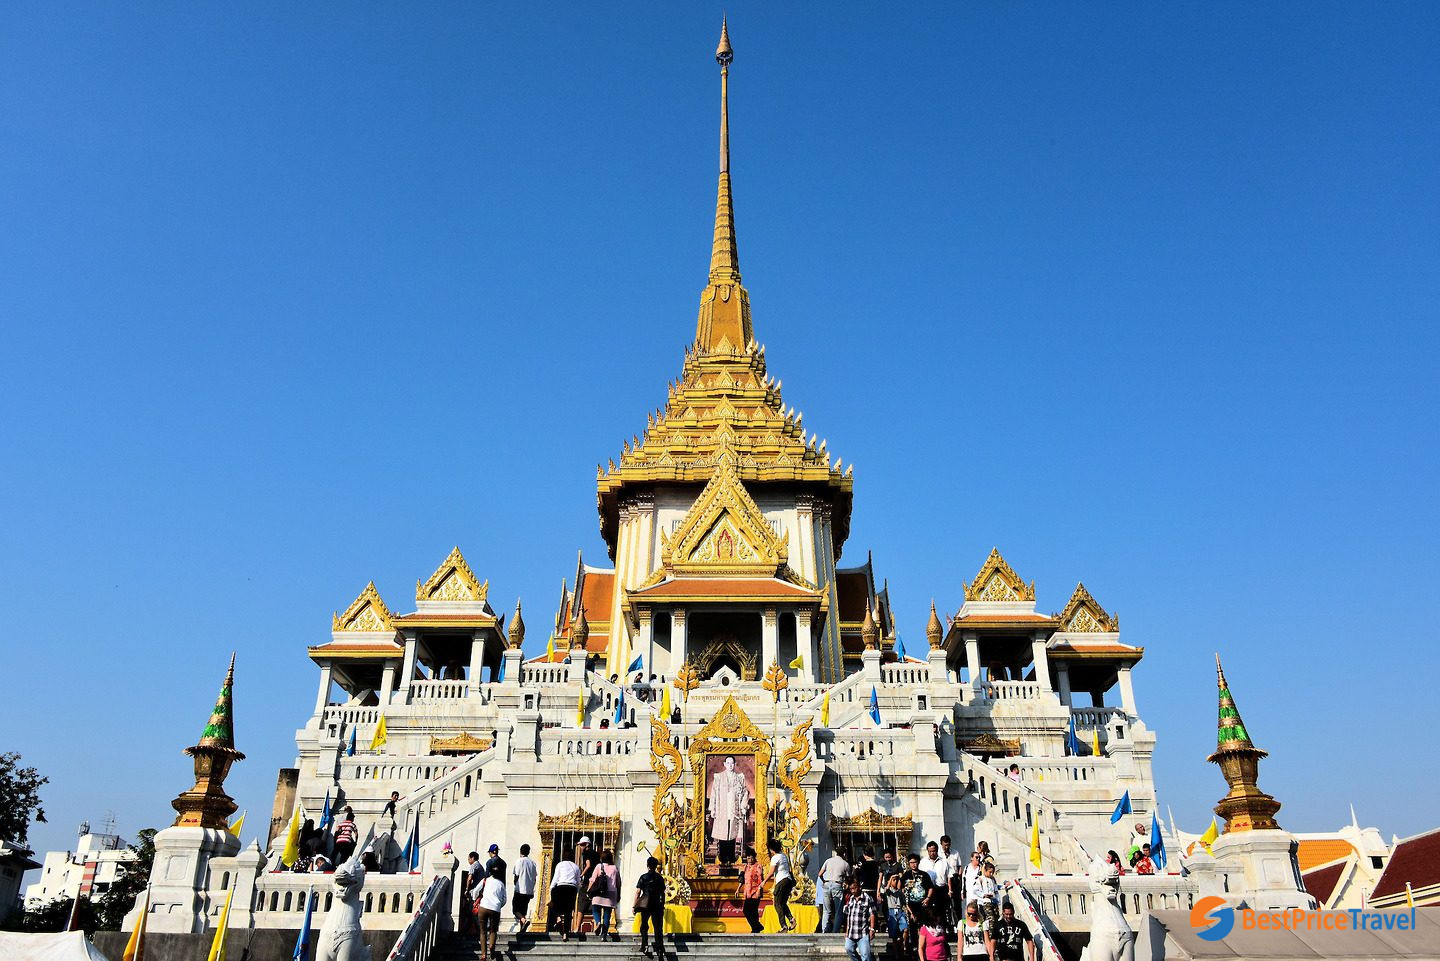 Wat Traimit is one of the most sacred temples in Bangkok